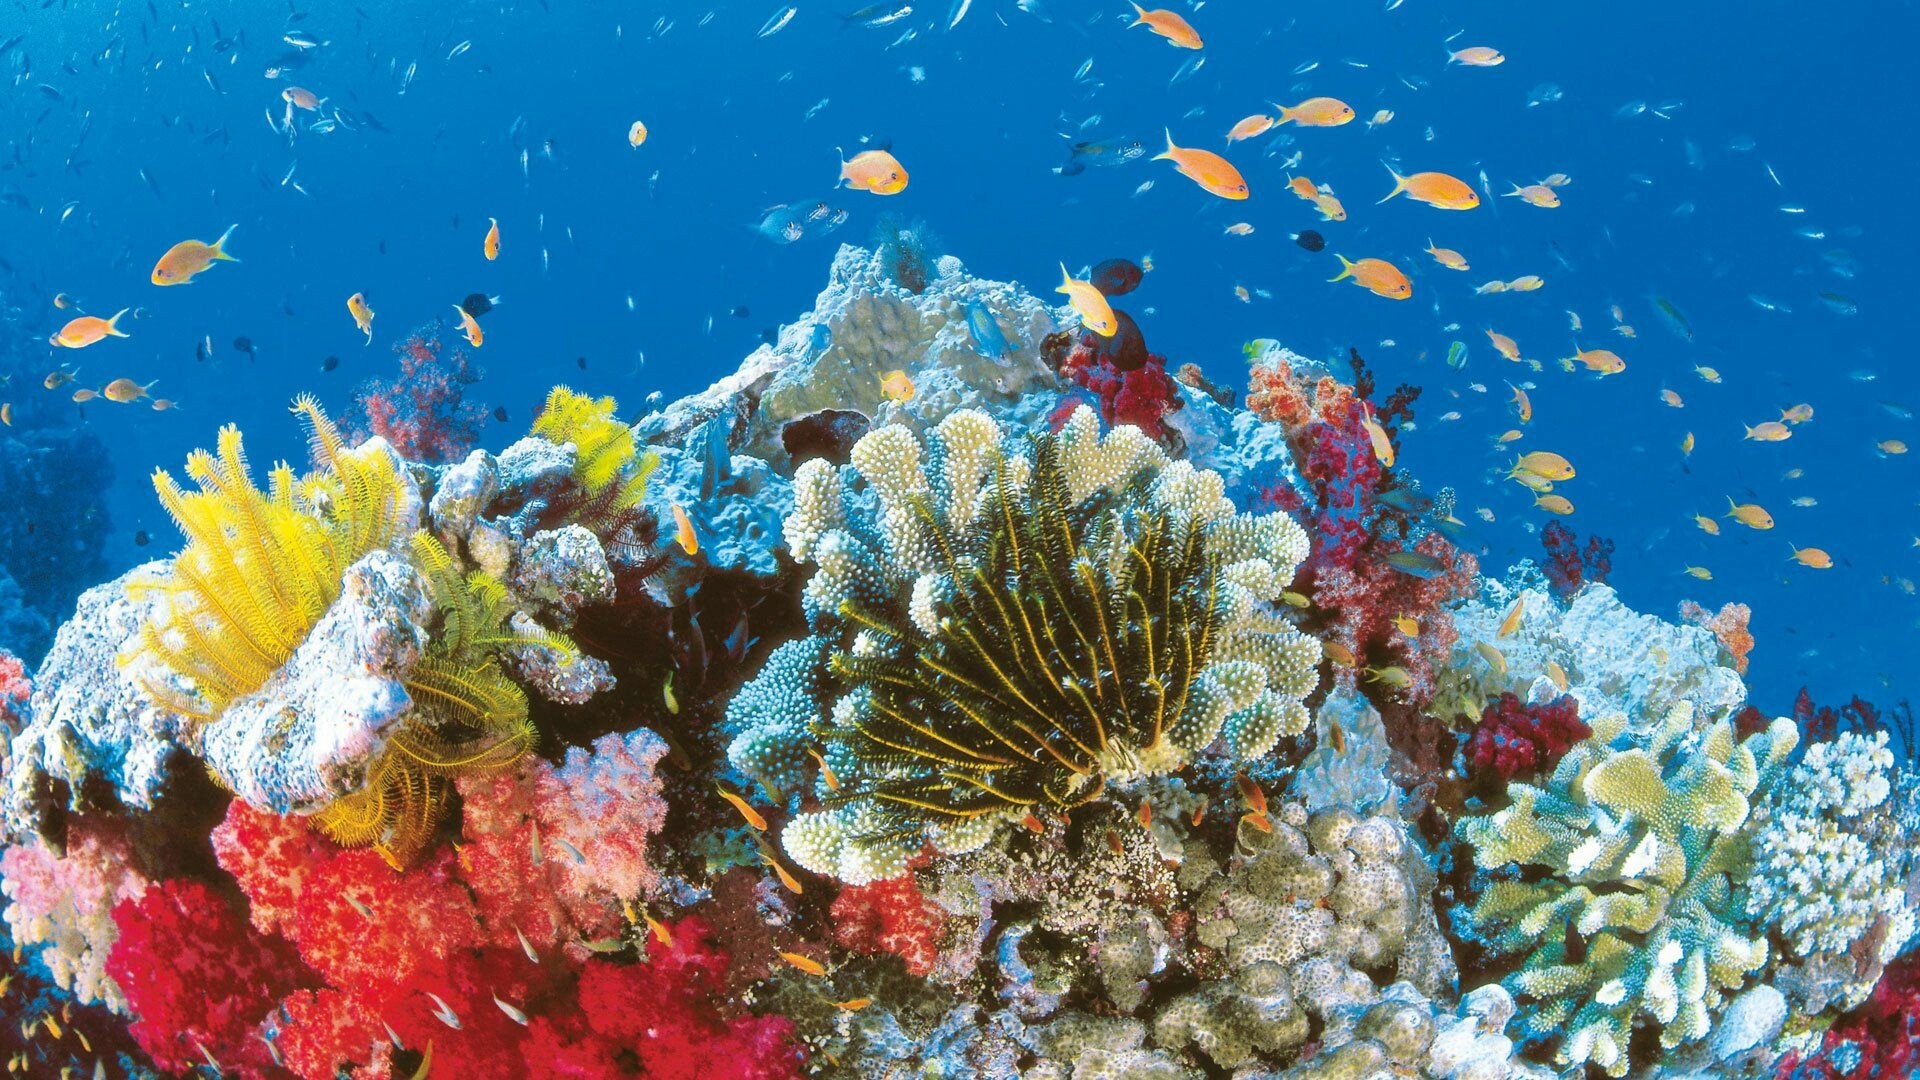 Coral Reef: The significant number and diversity of hiding places in reefs are the most important factor causing the great diversity and high biomass of the organisms. 1920x1080 Full HD Wallpaper.